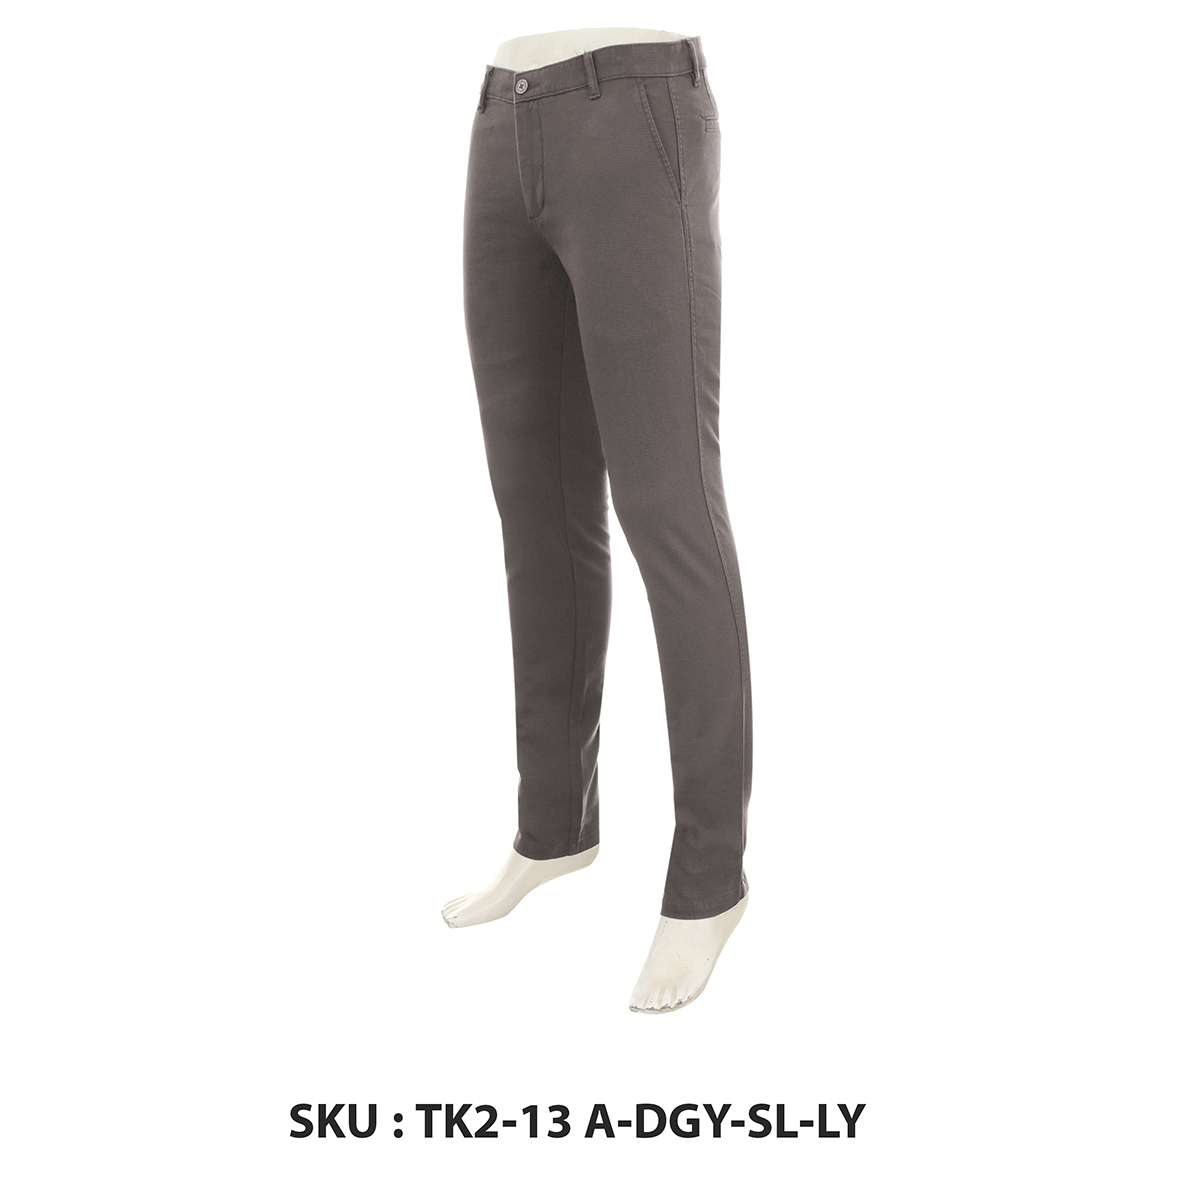 Classic Polo Mens Trousers Tk2-13 A-Dgy-Sl-Ly Grey 40